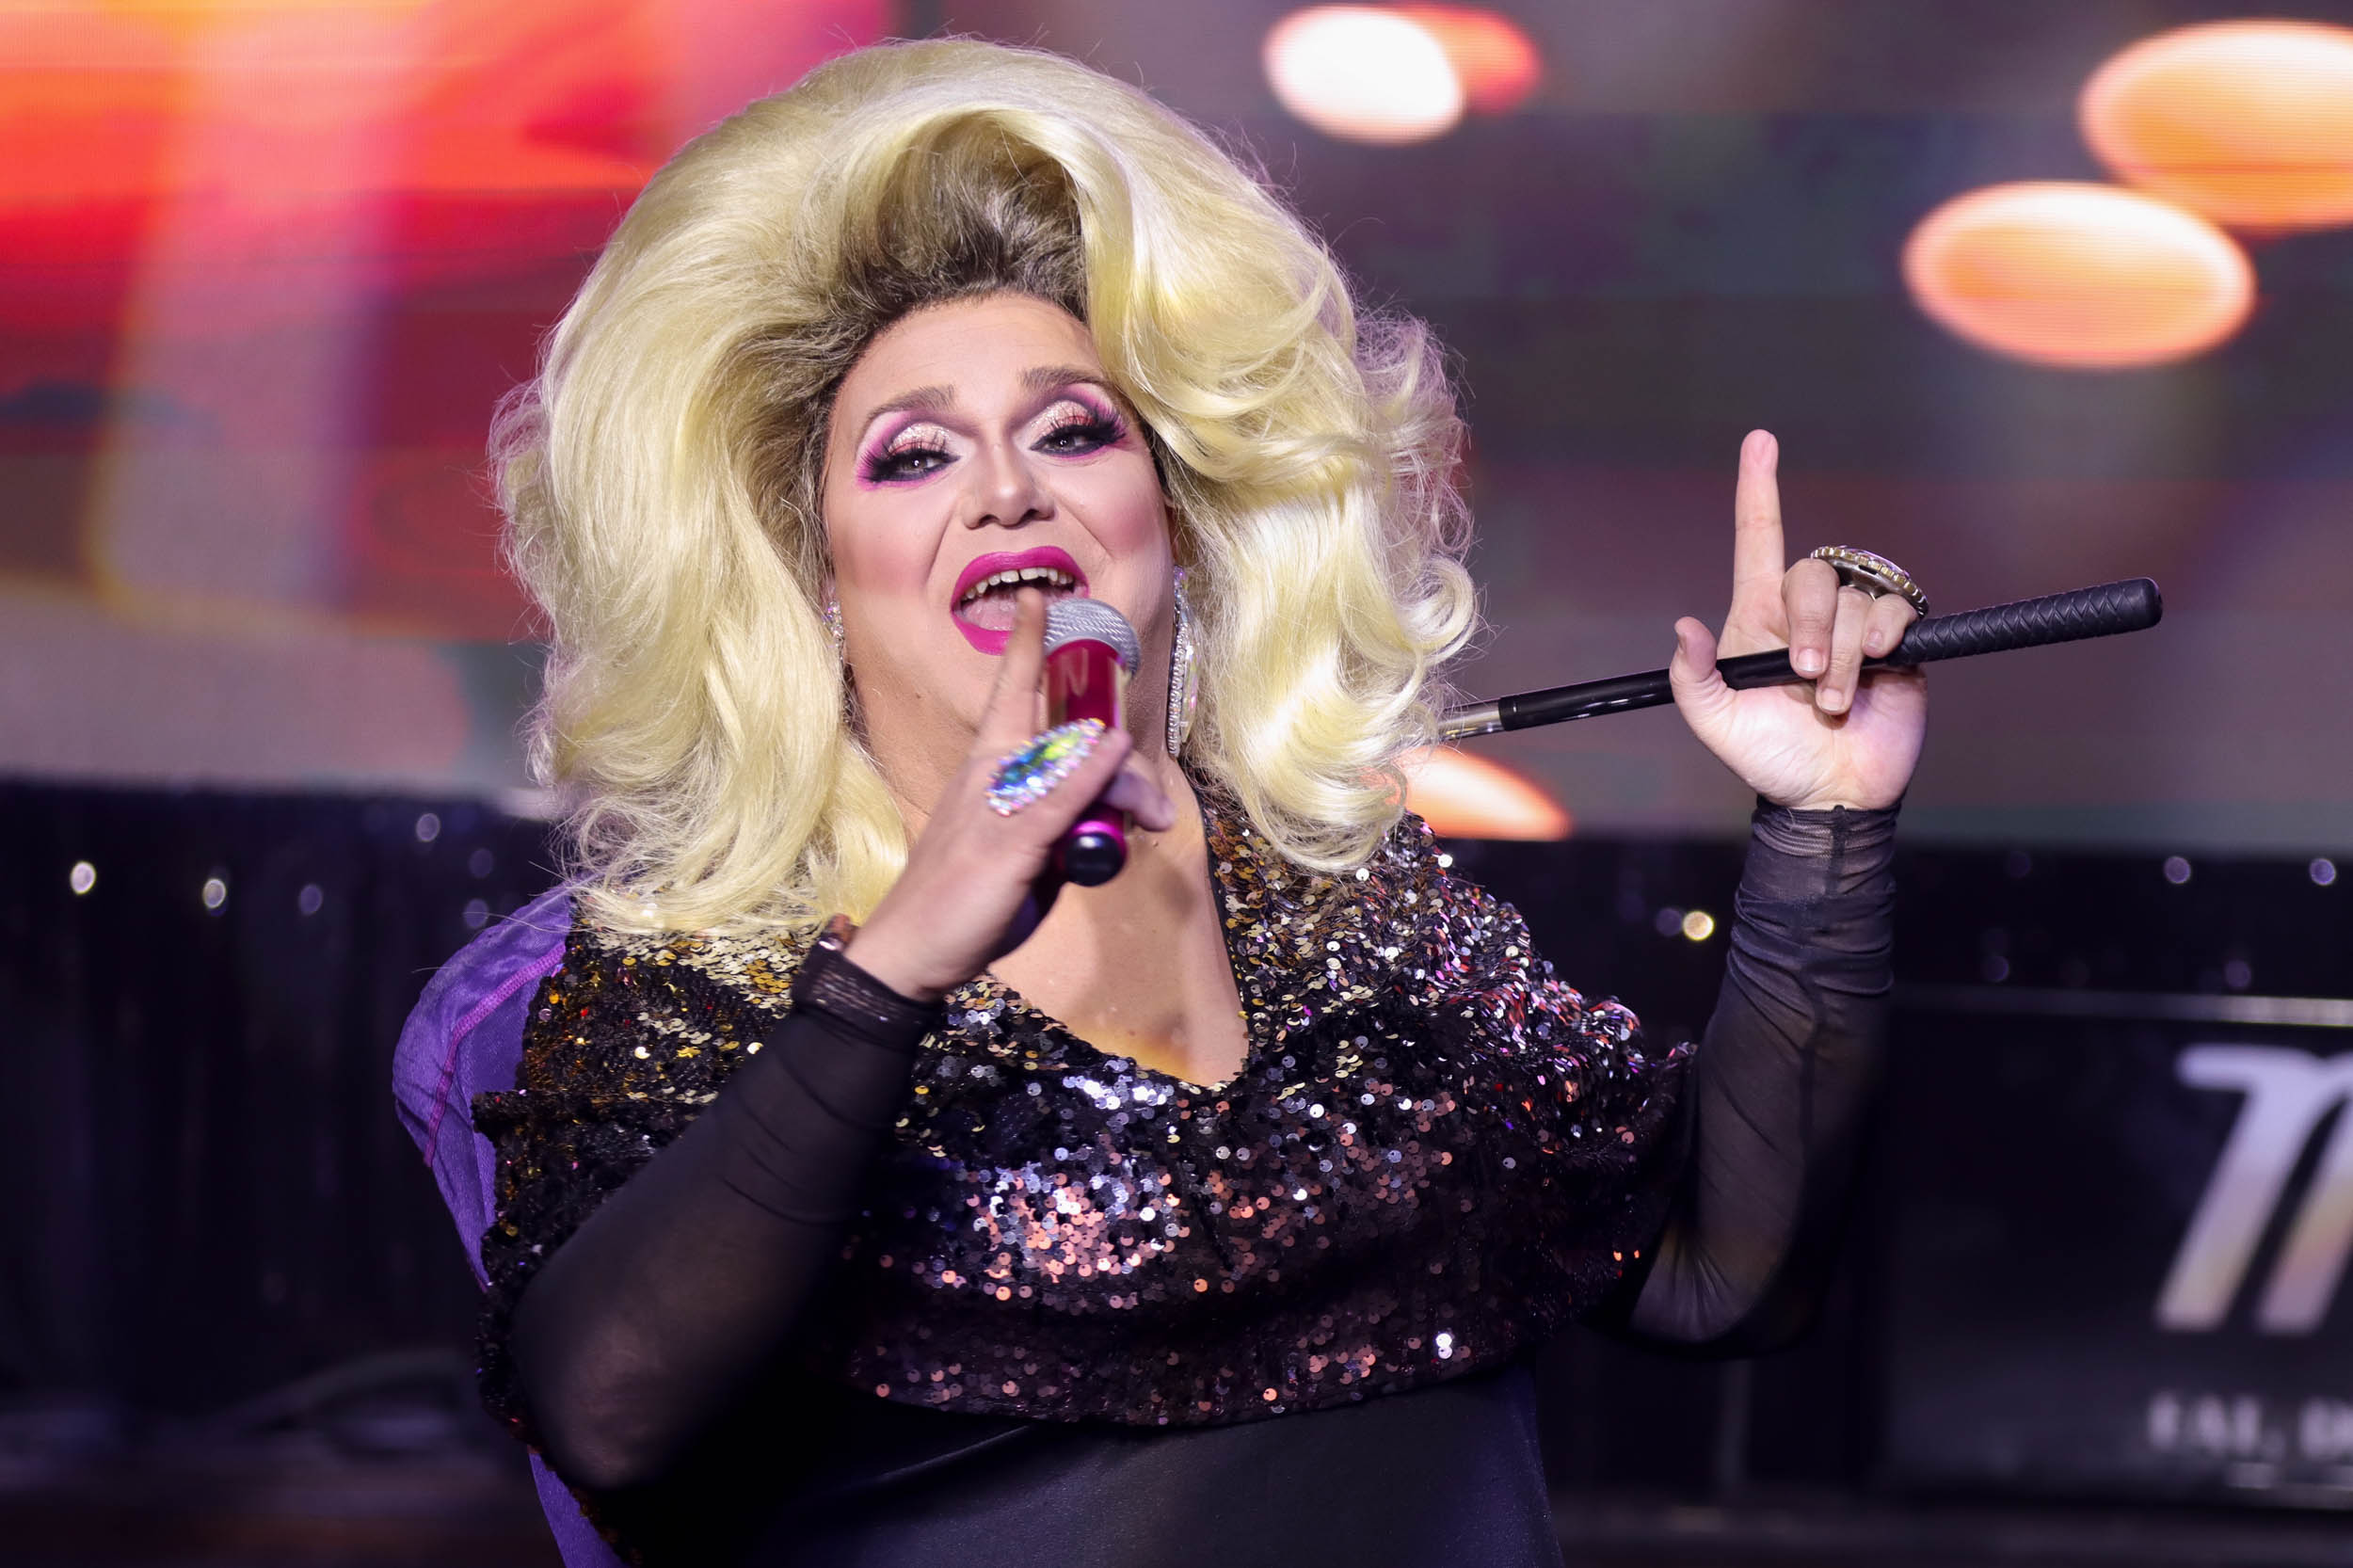 A drag queen in a large blonde wig speaking into a microphone as she addresses the crowd. In her other hand she holds a purple butterfly net behind her head used to collect money.